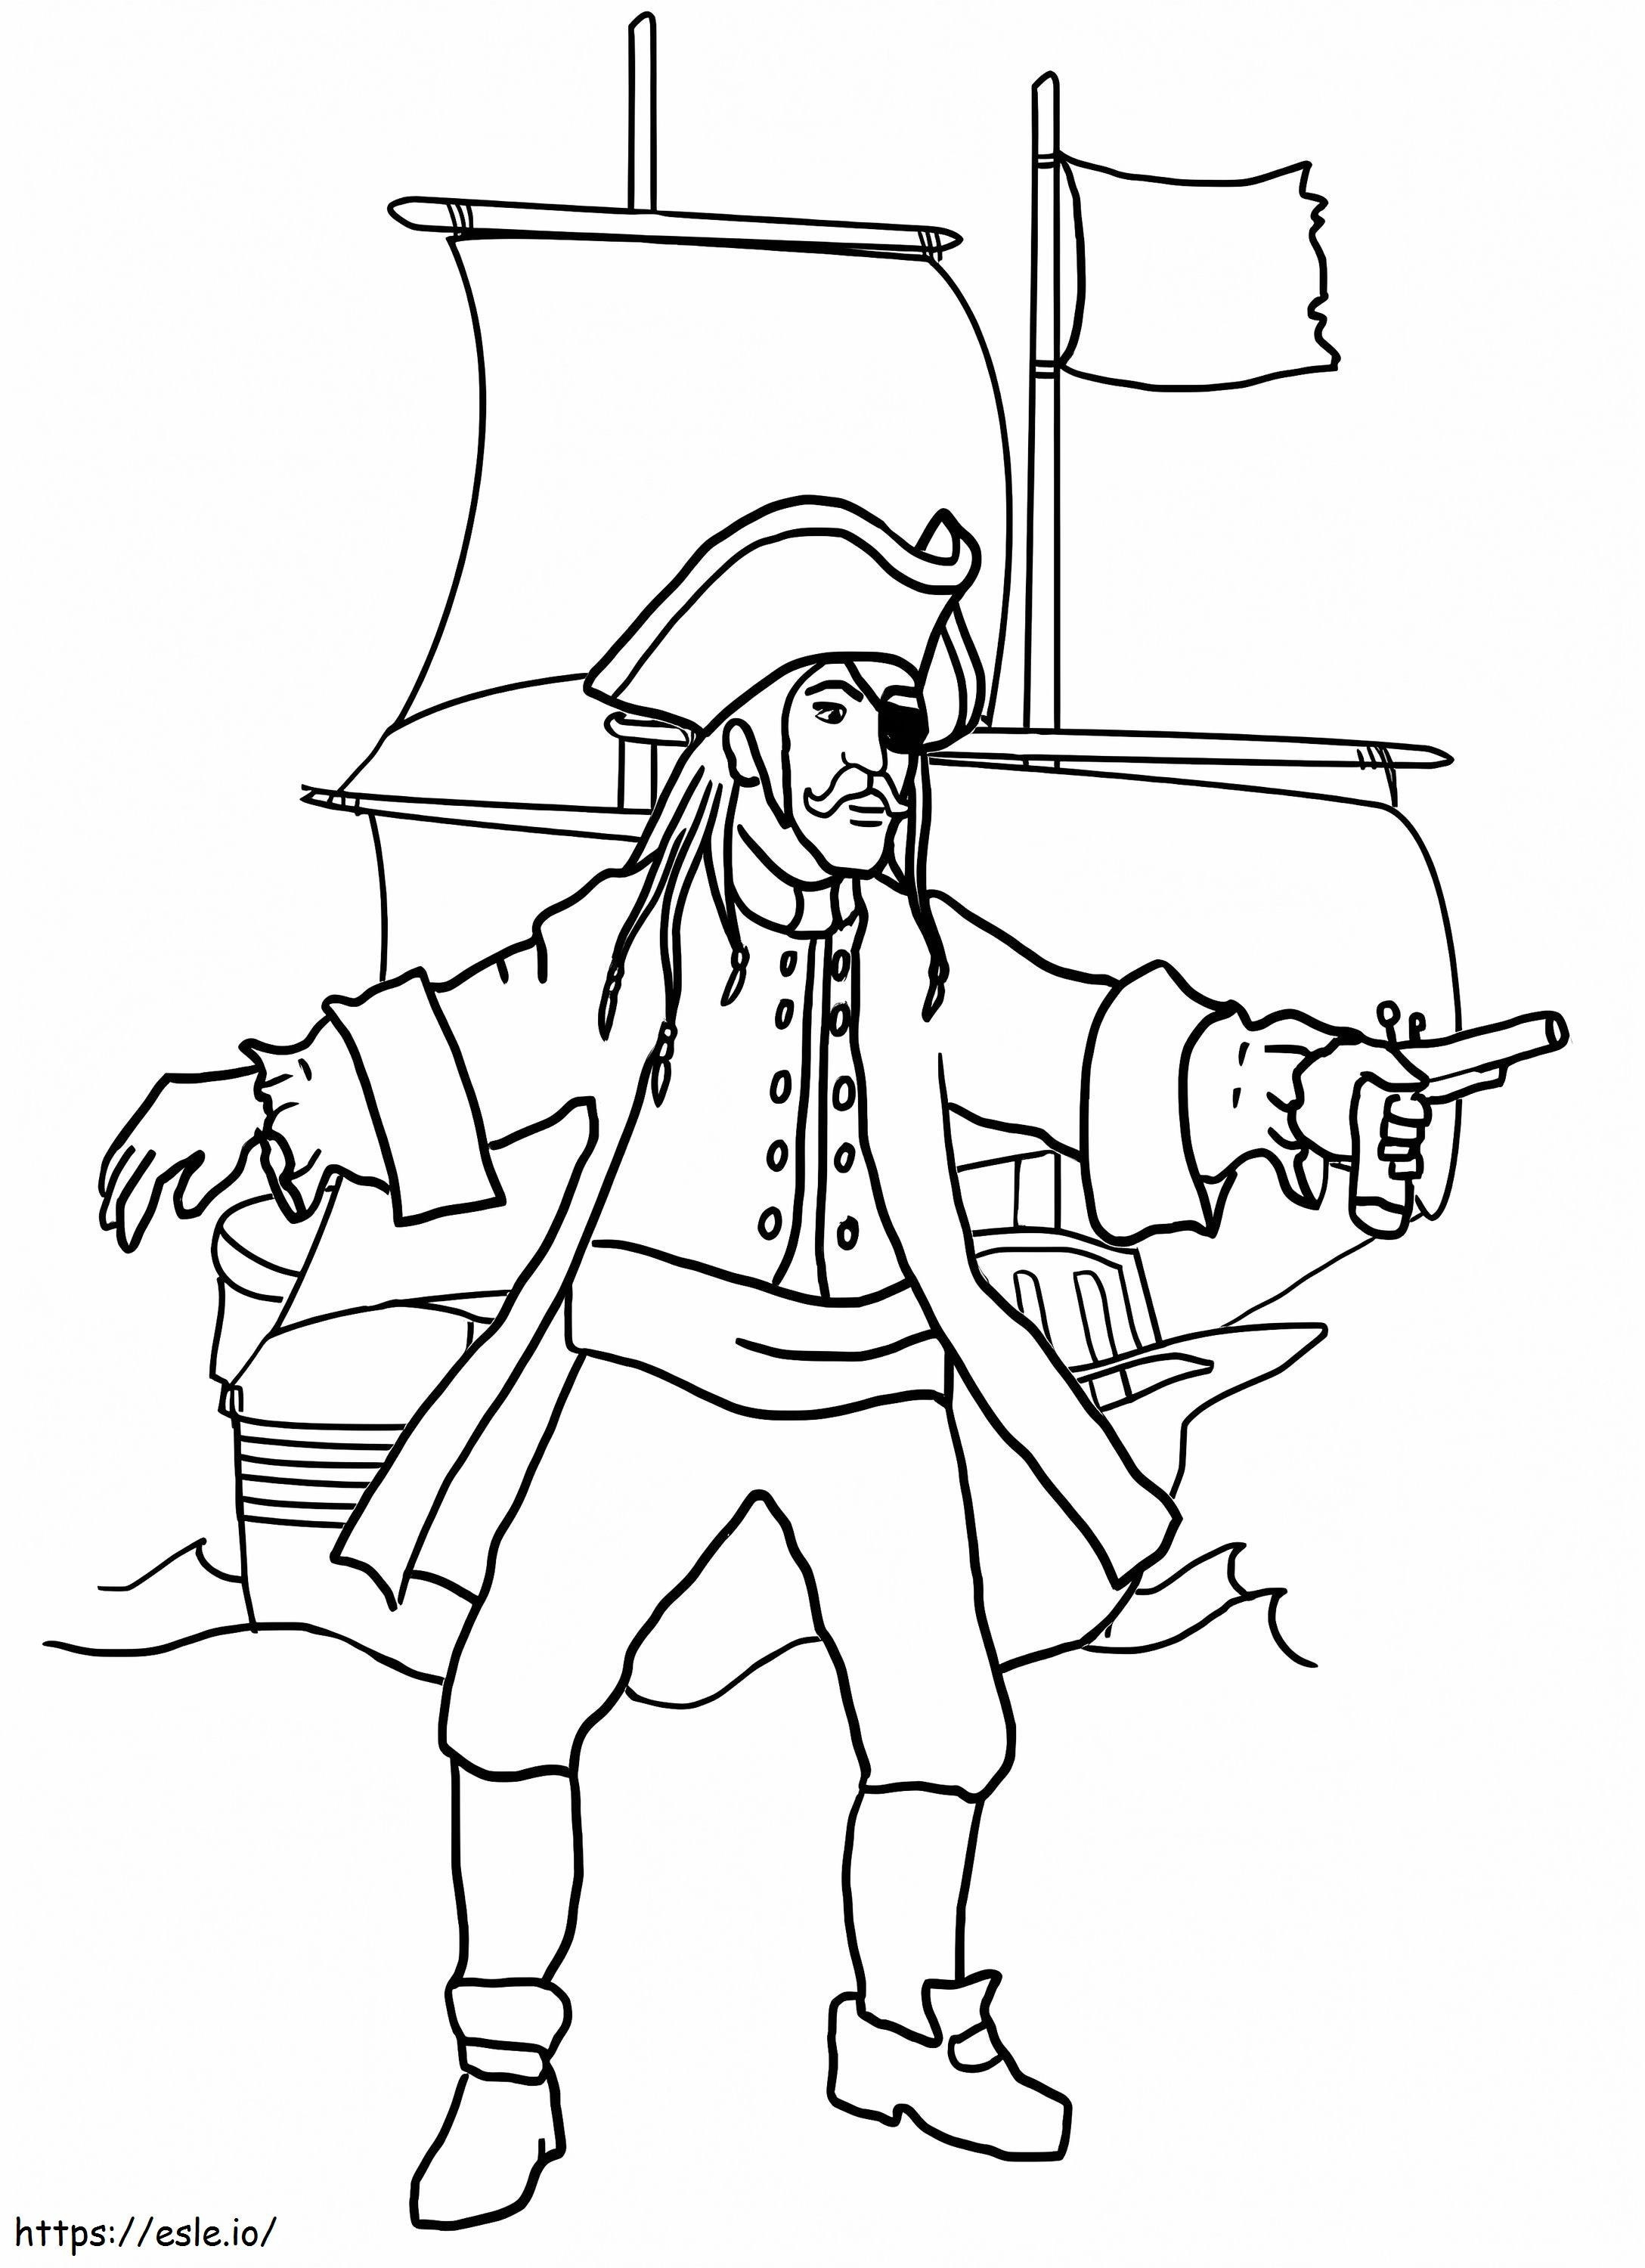 Pirate And Pirate Ship coloring page